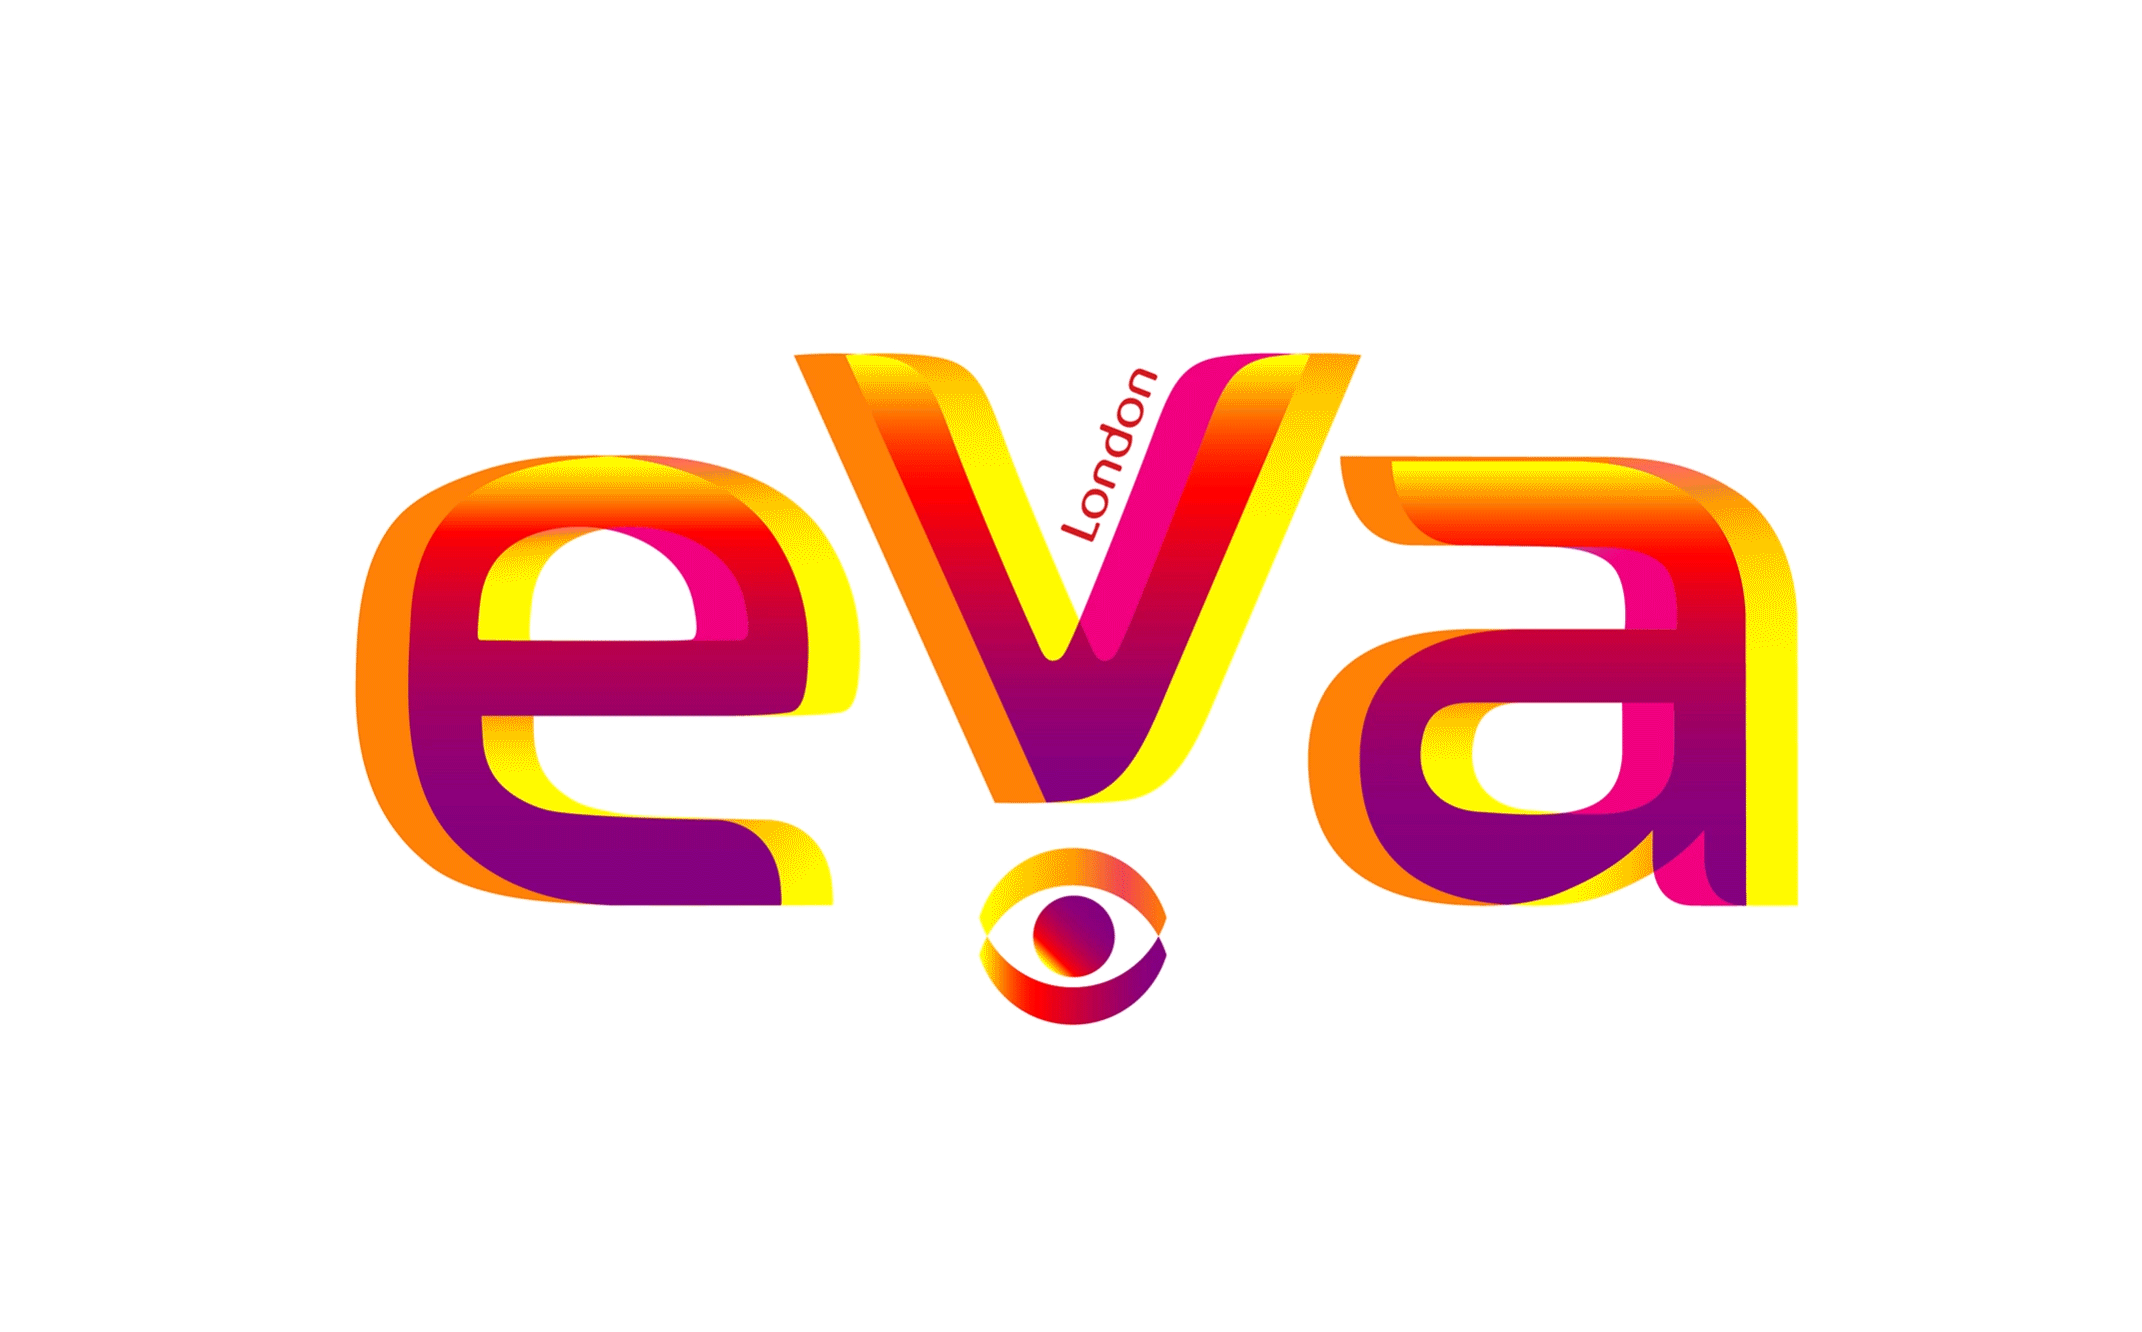 Branding Identity for EVA London conference by Color.Zone branding team.